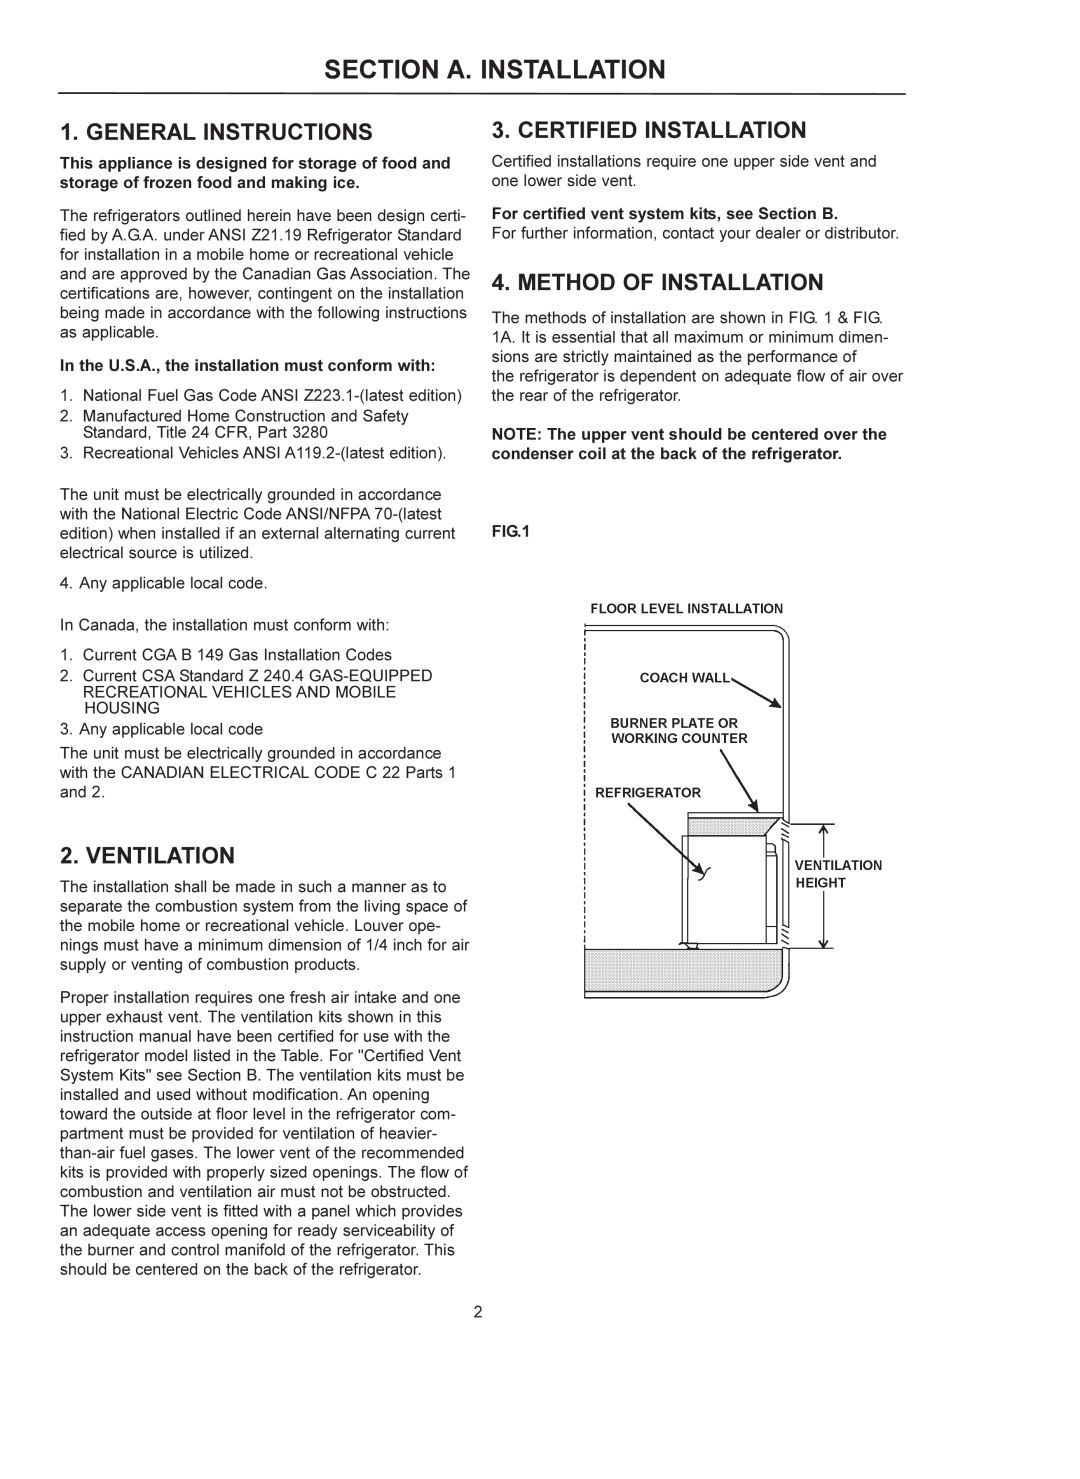 Dometic RM 4223 Section A. Installation, General Instructions, Ventilation, Certified Installation, Method Of Installation 